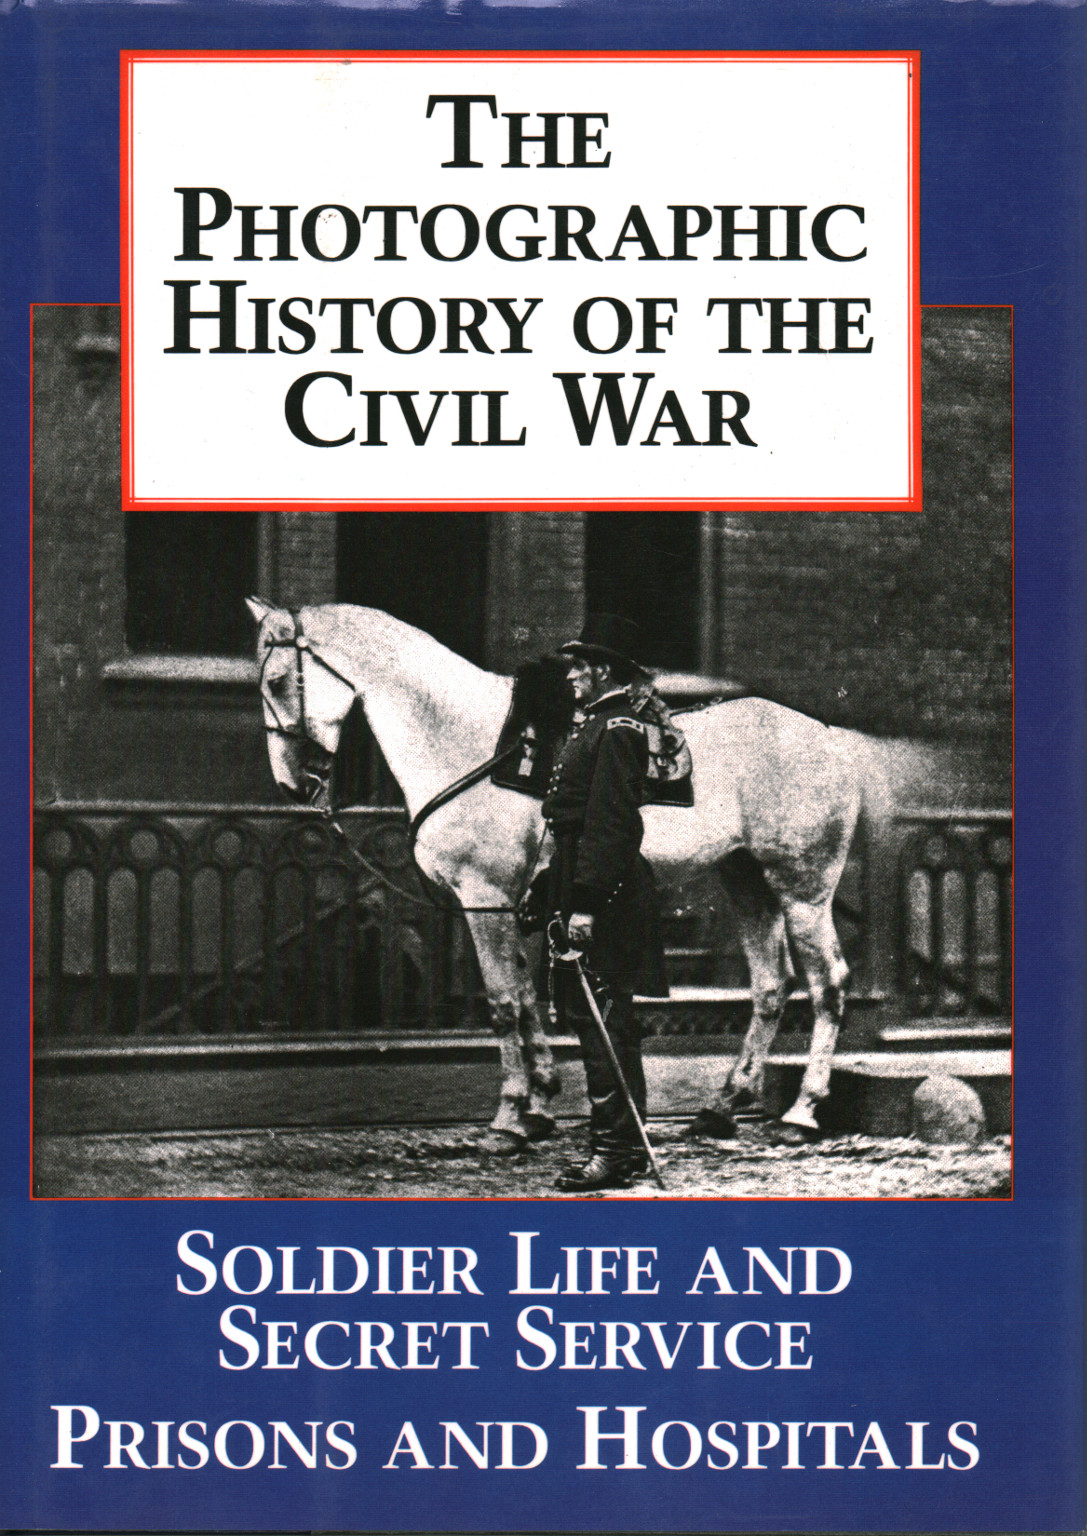 The Photographic History of the Civil War. Vol. 4, s.a.